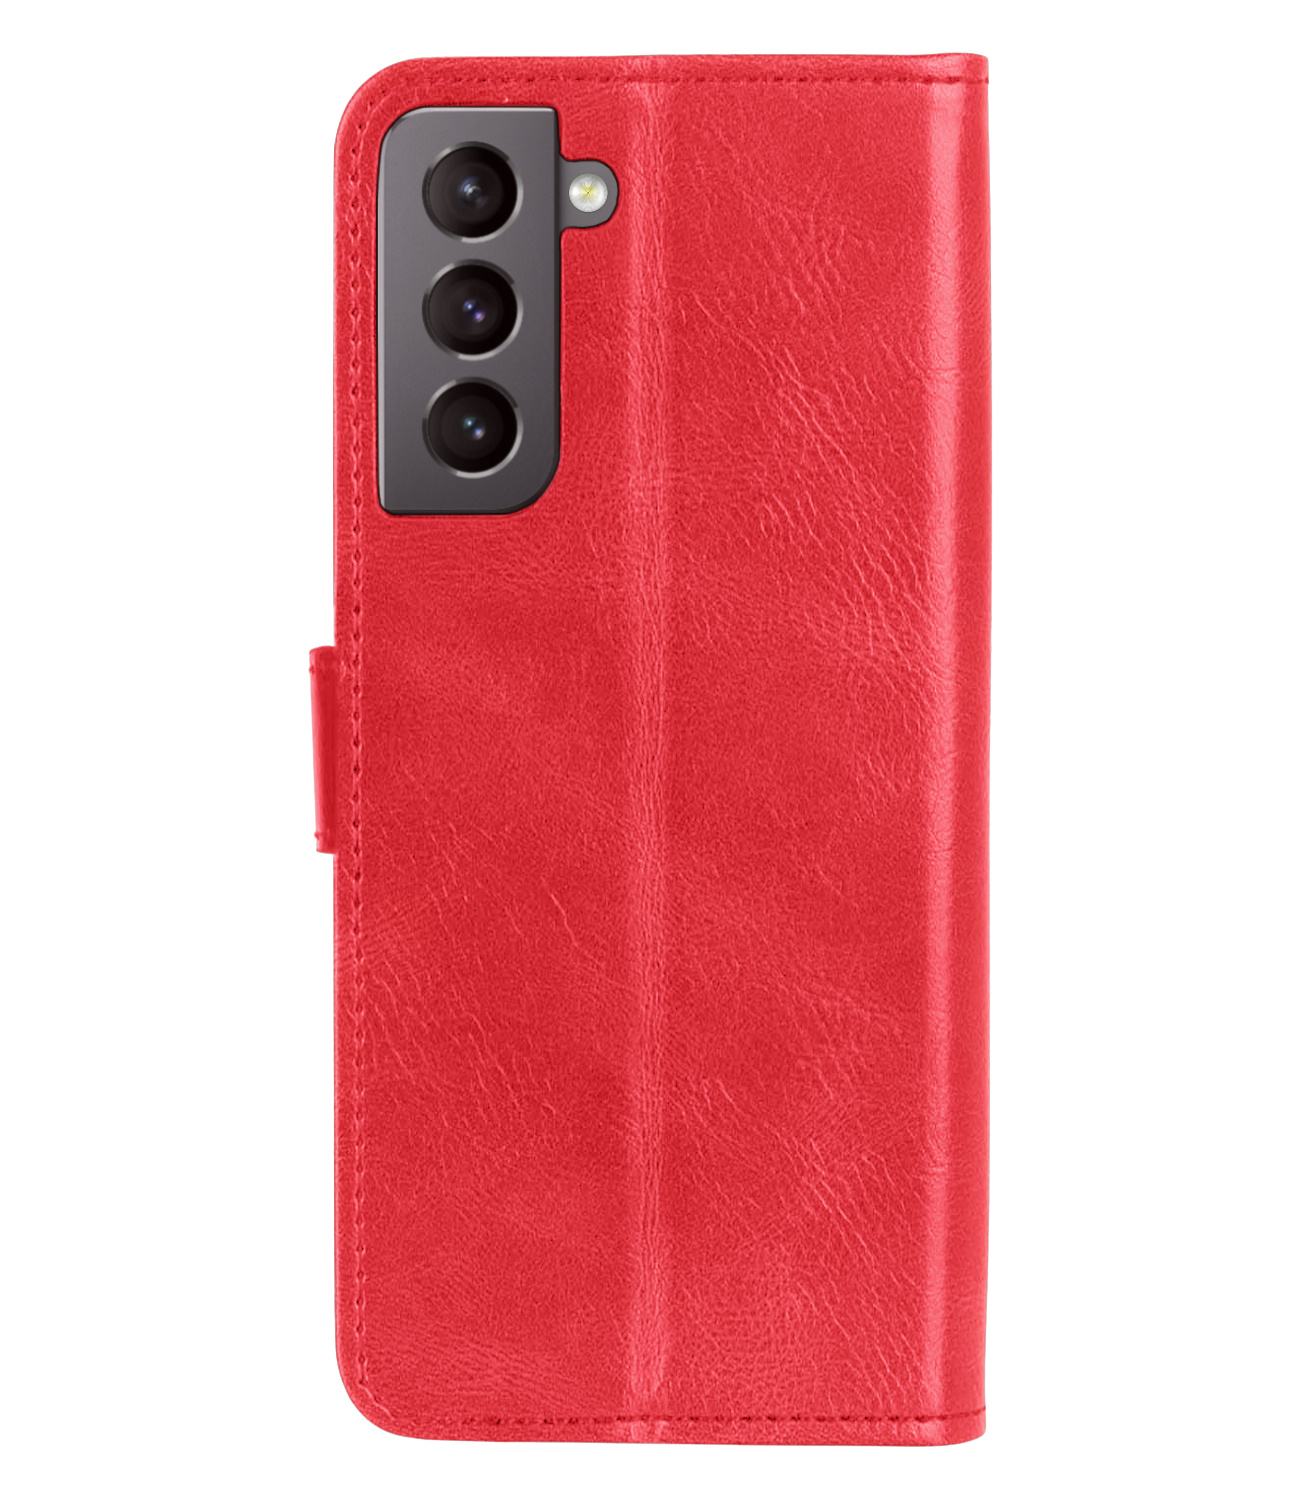 Nomfy Samsung Galaxy S21 FE Hoes Bookcase Rood - Samsung Galaxy S21 FE Book Cover Flipcase - Samsung Galaxy S21 FE Hoesje - Rood